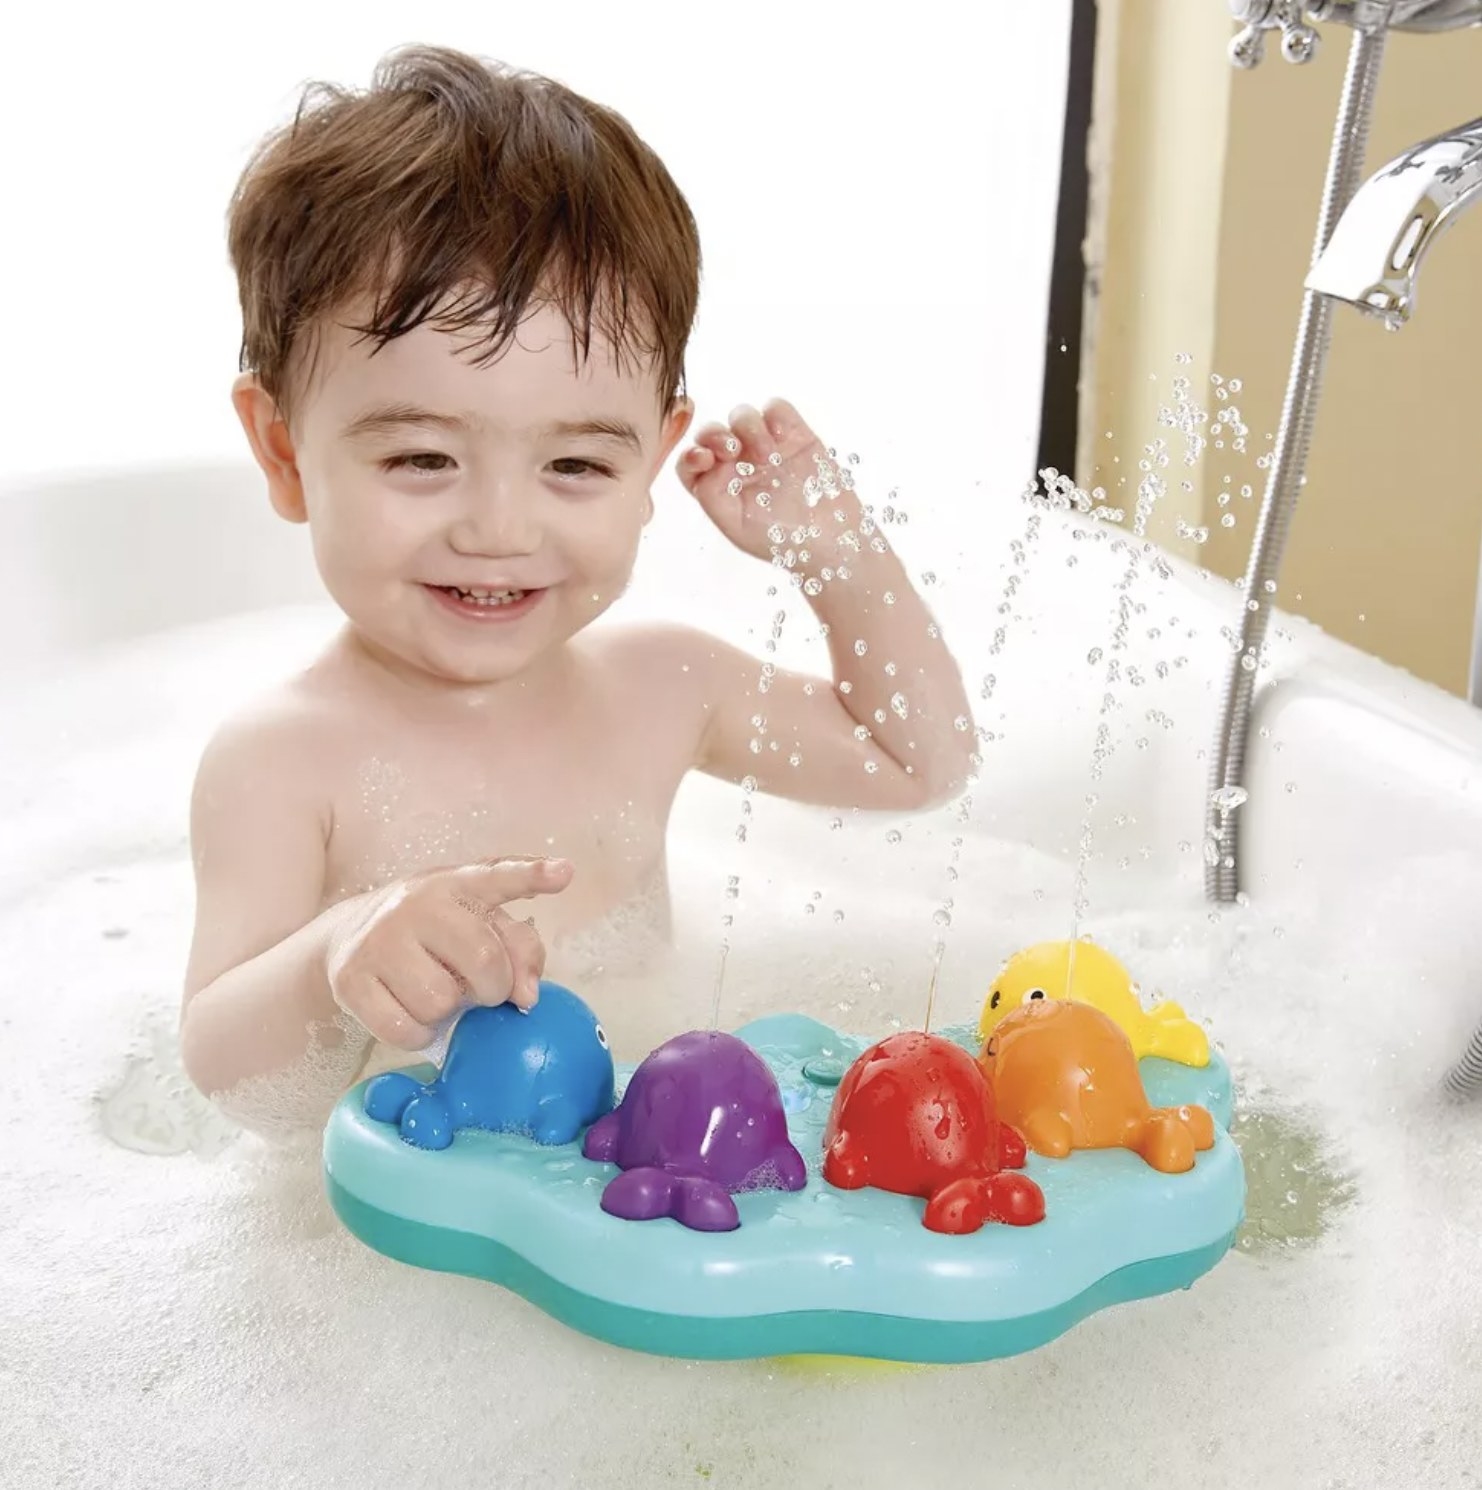 child playing with the bath toy